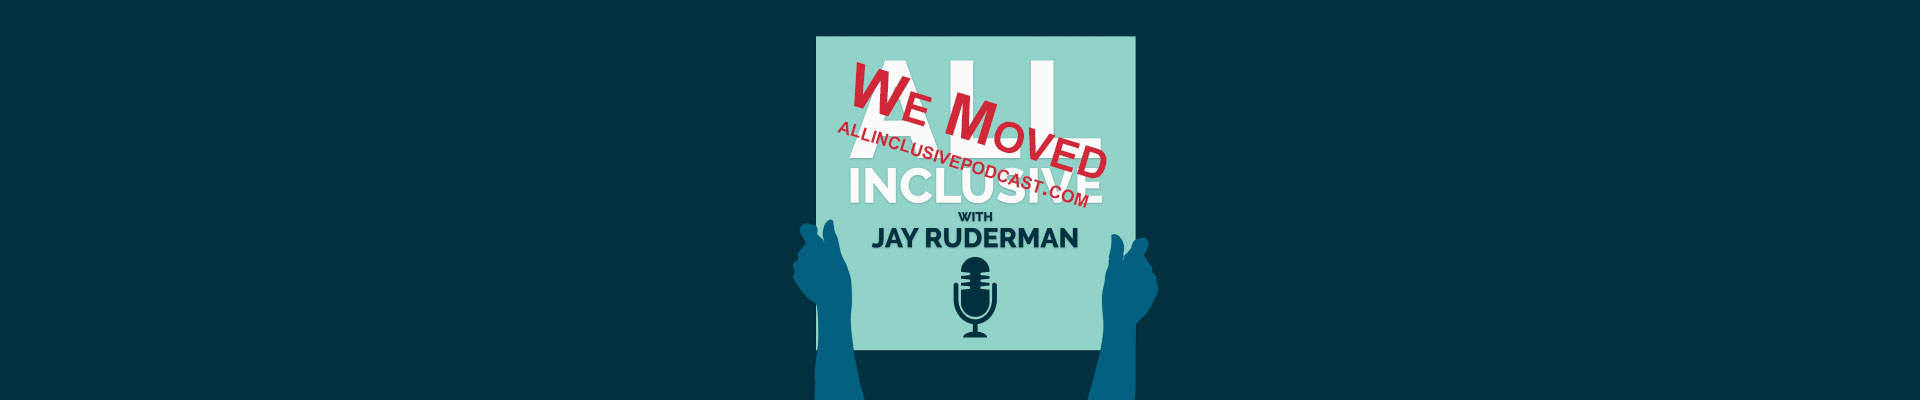 All Inclusive with Jay Ruderman